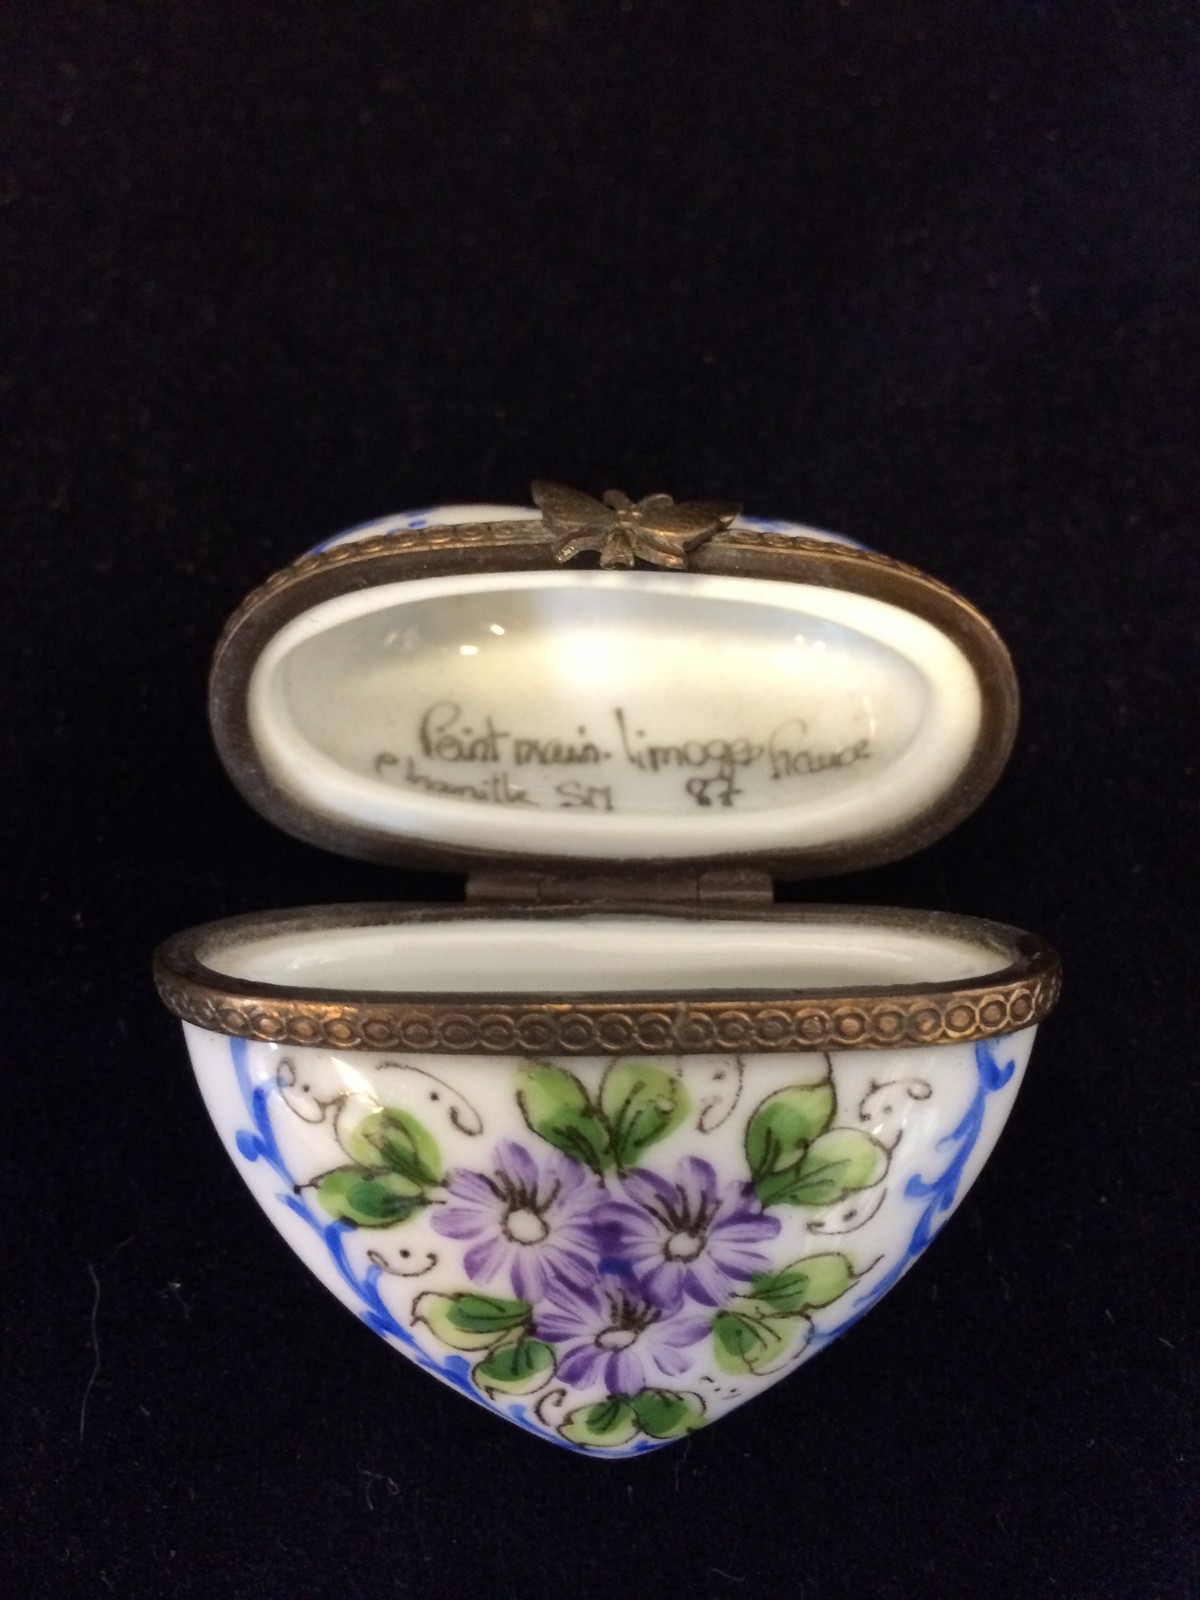 Blue and White floral box heart  with a butterfly clasp Peint Main Limoges France 87 - Image 3 of 3